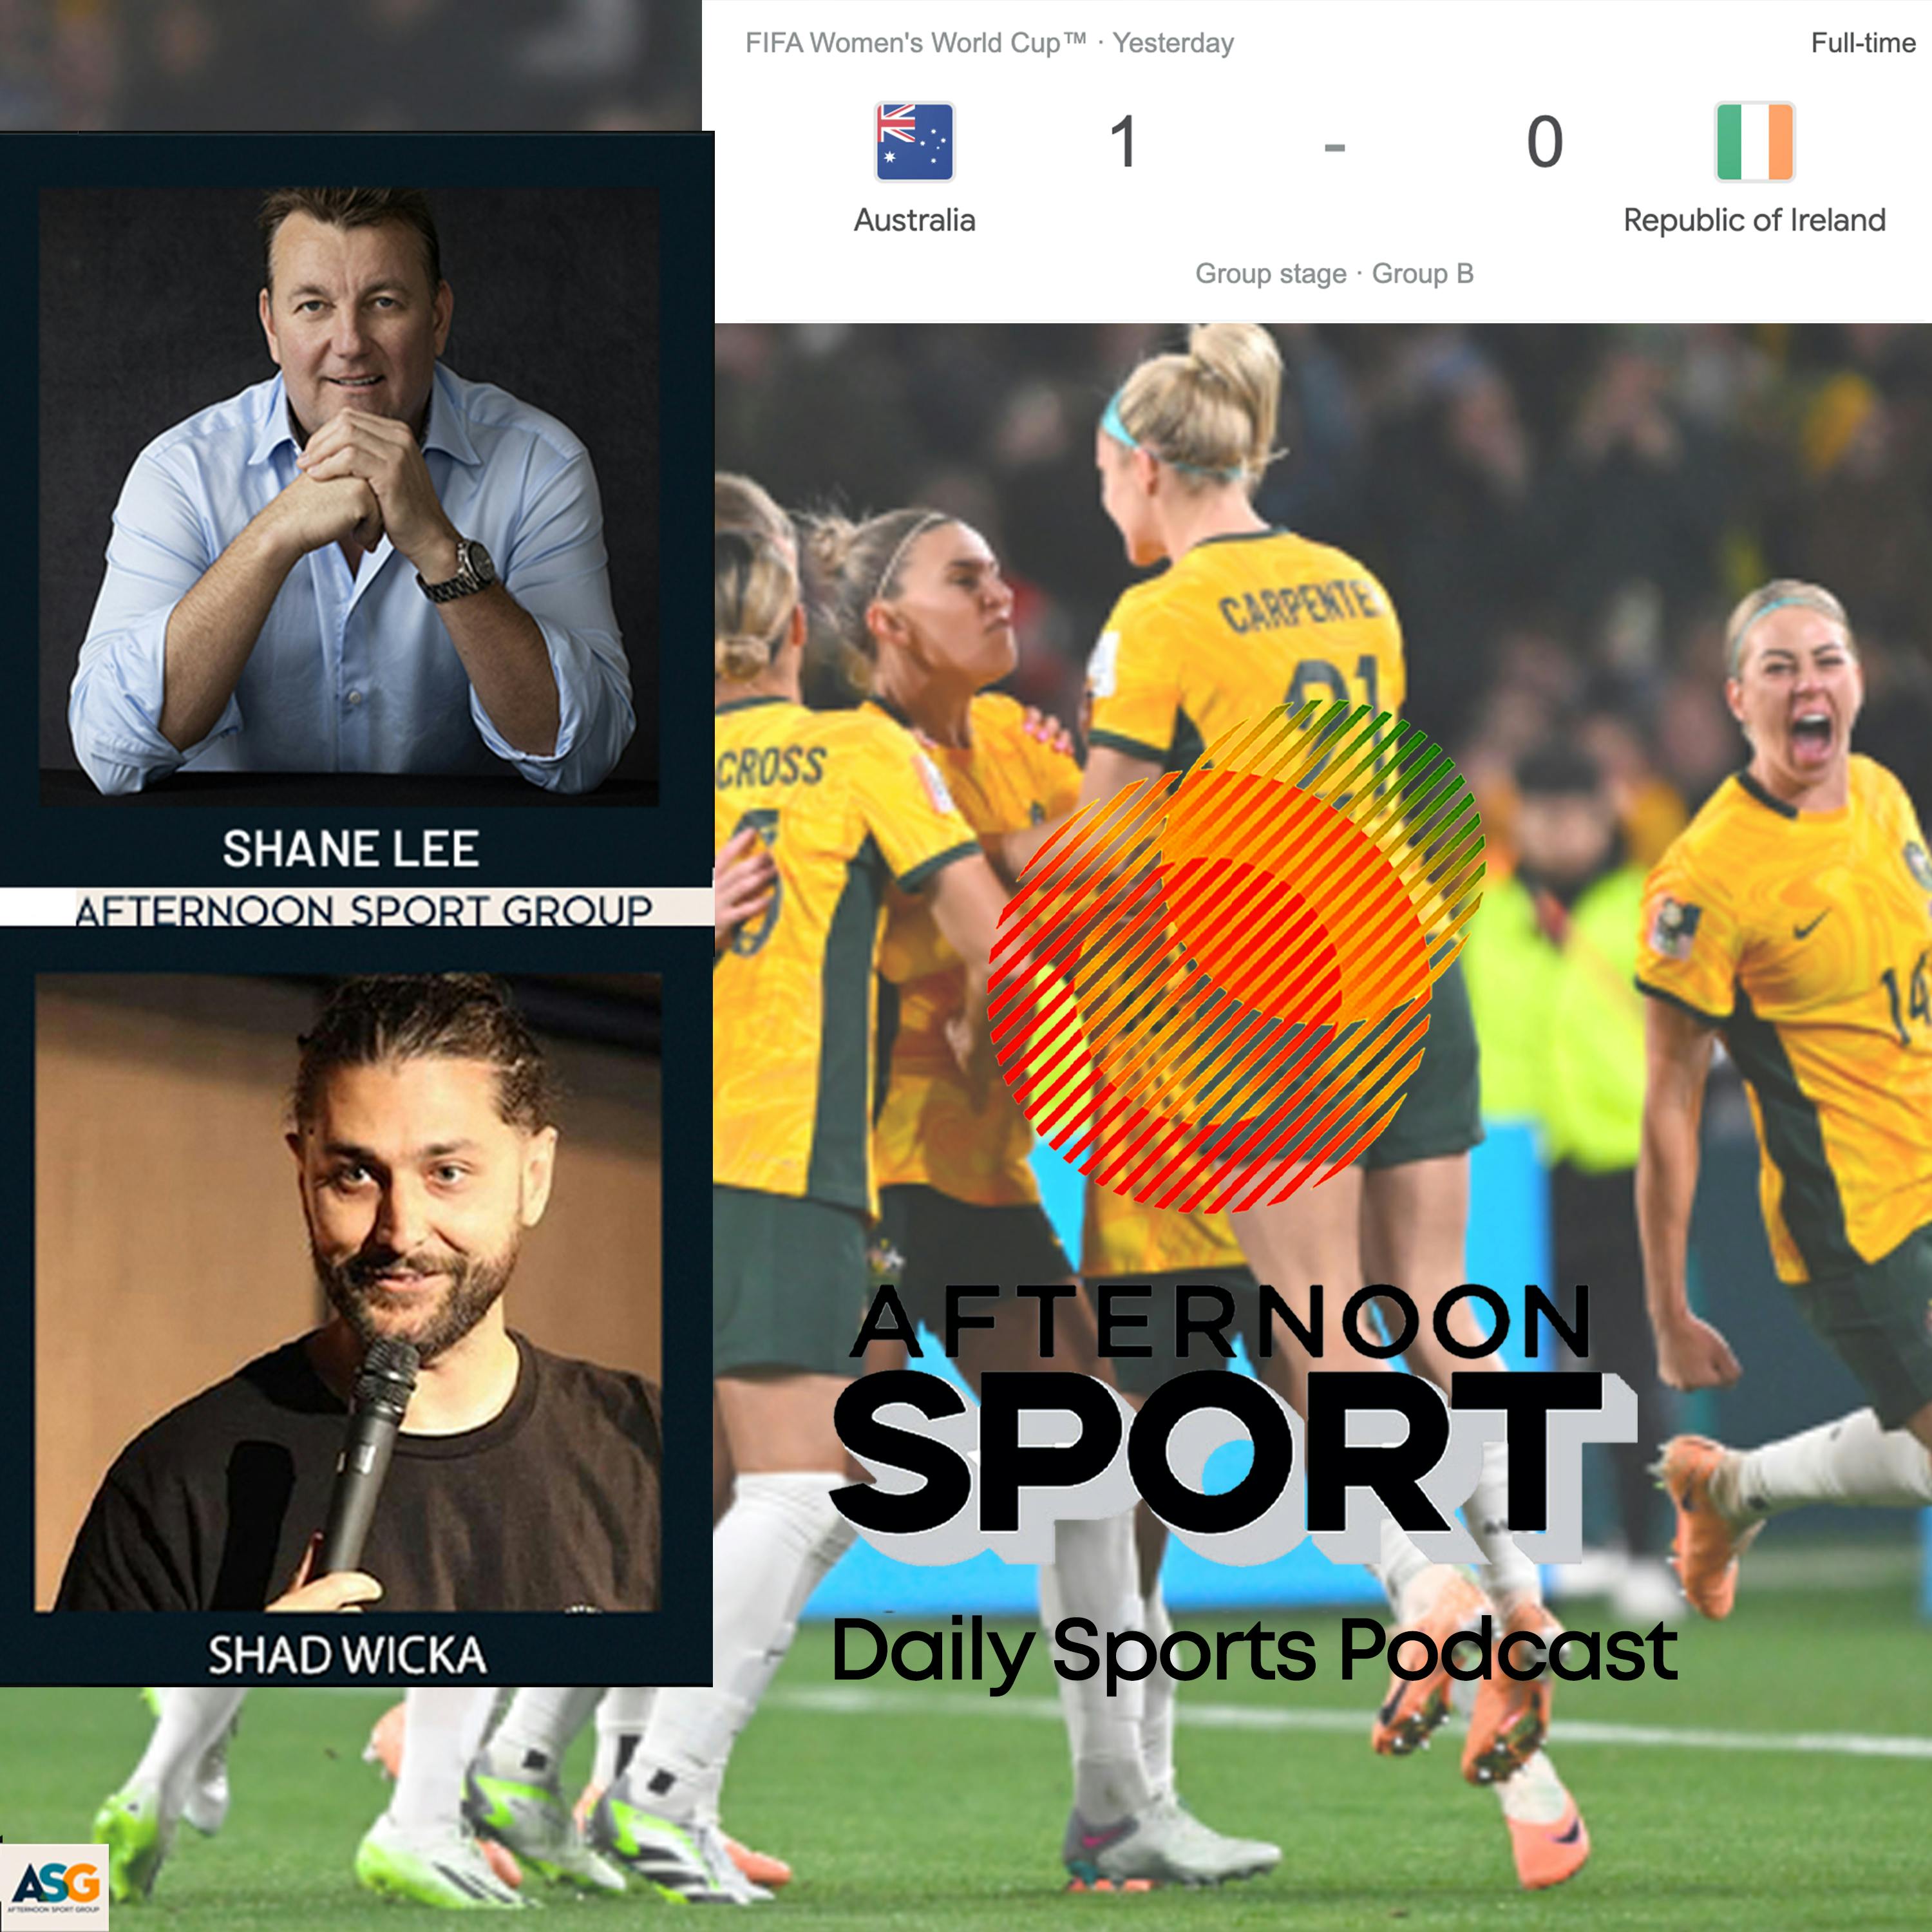 21st July Shane Lee & Shad Wicka: Win for the Matildas! Sam Kerr injury, Ashes Test 4 Day 2 (pray for rain), British Open, Maurice Rioli has the spirit of a champion, NRL possibilities + more!